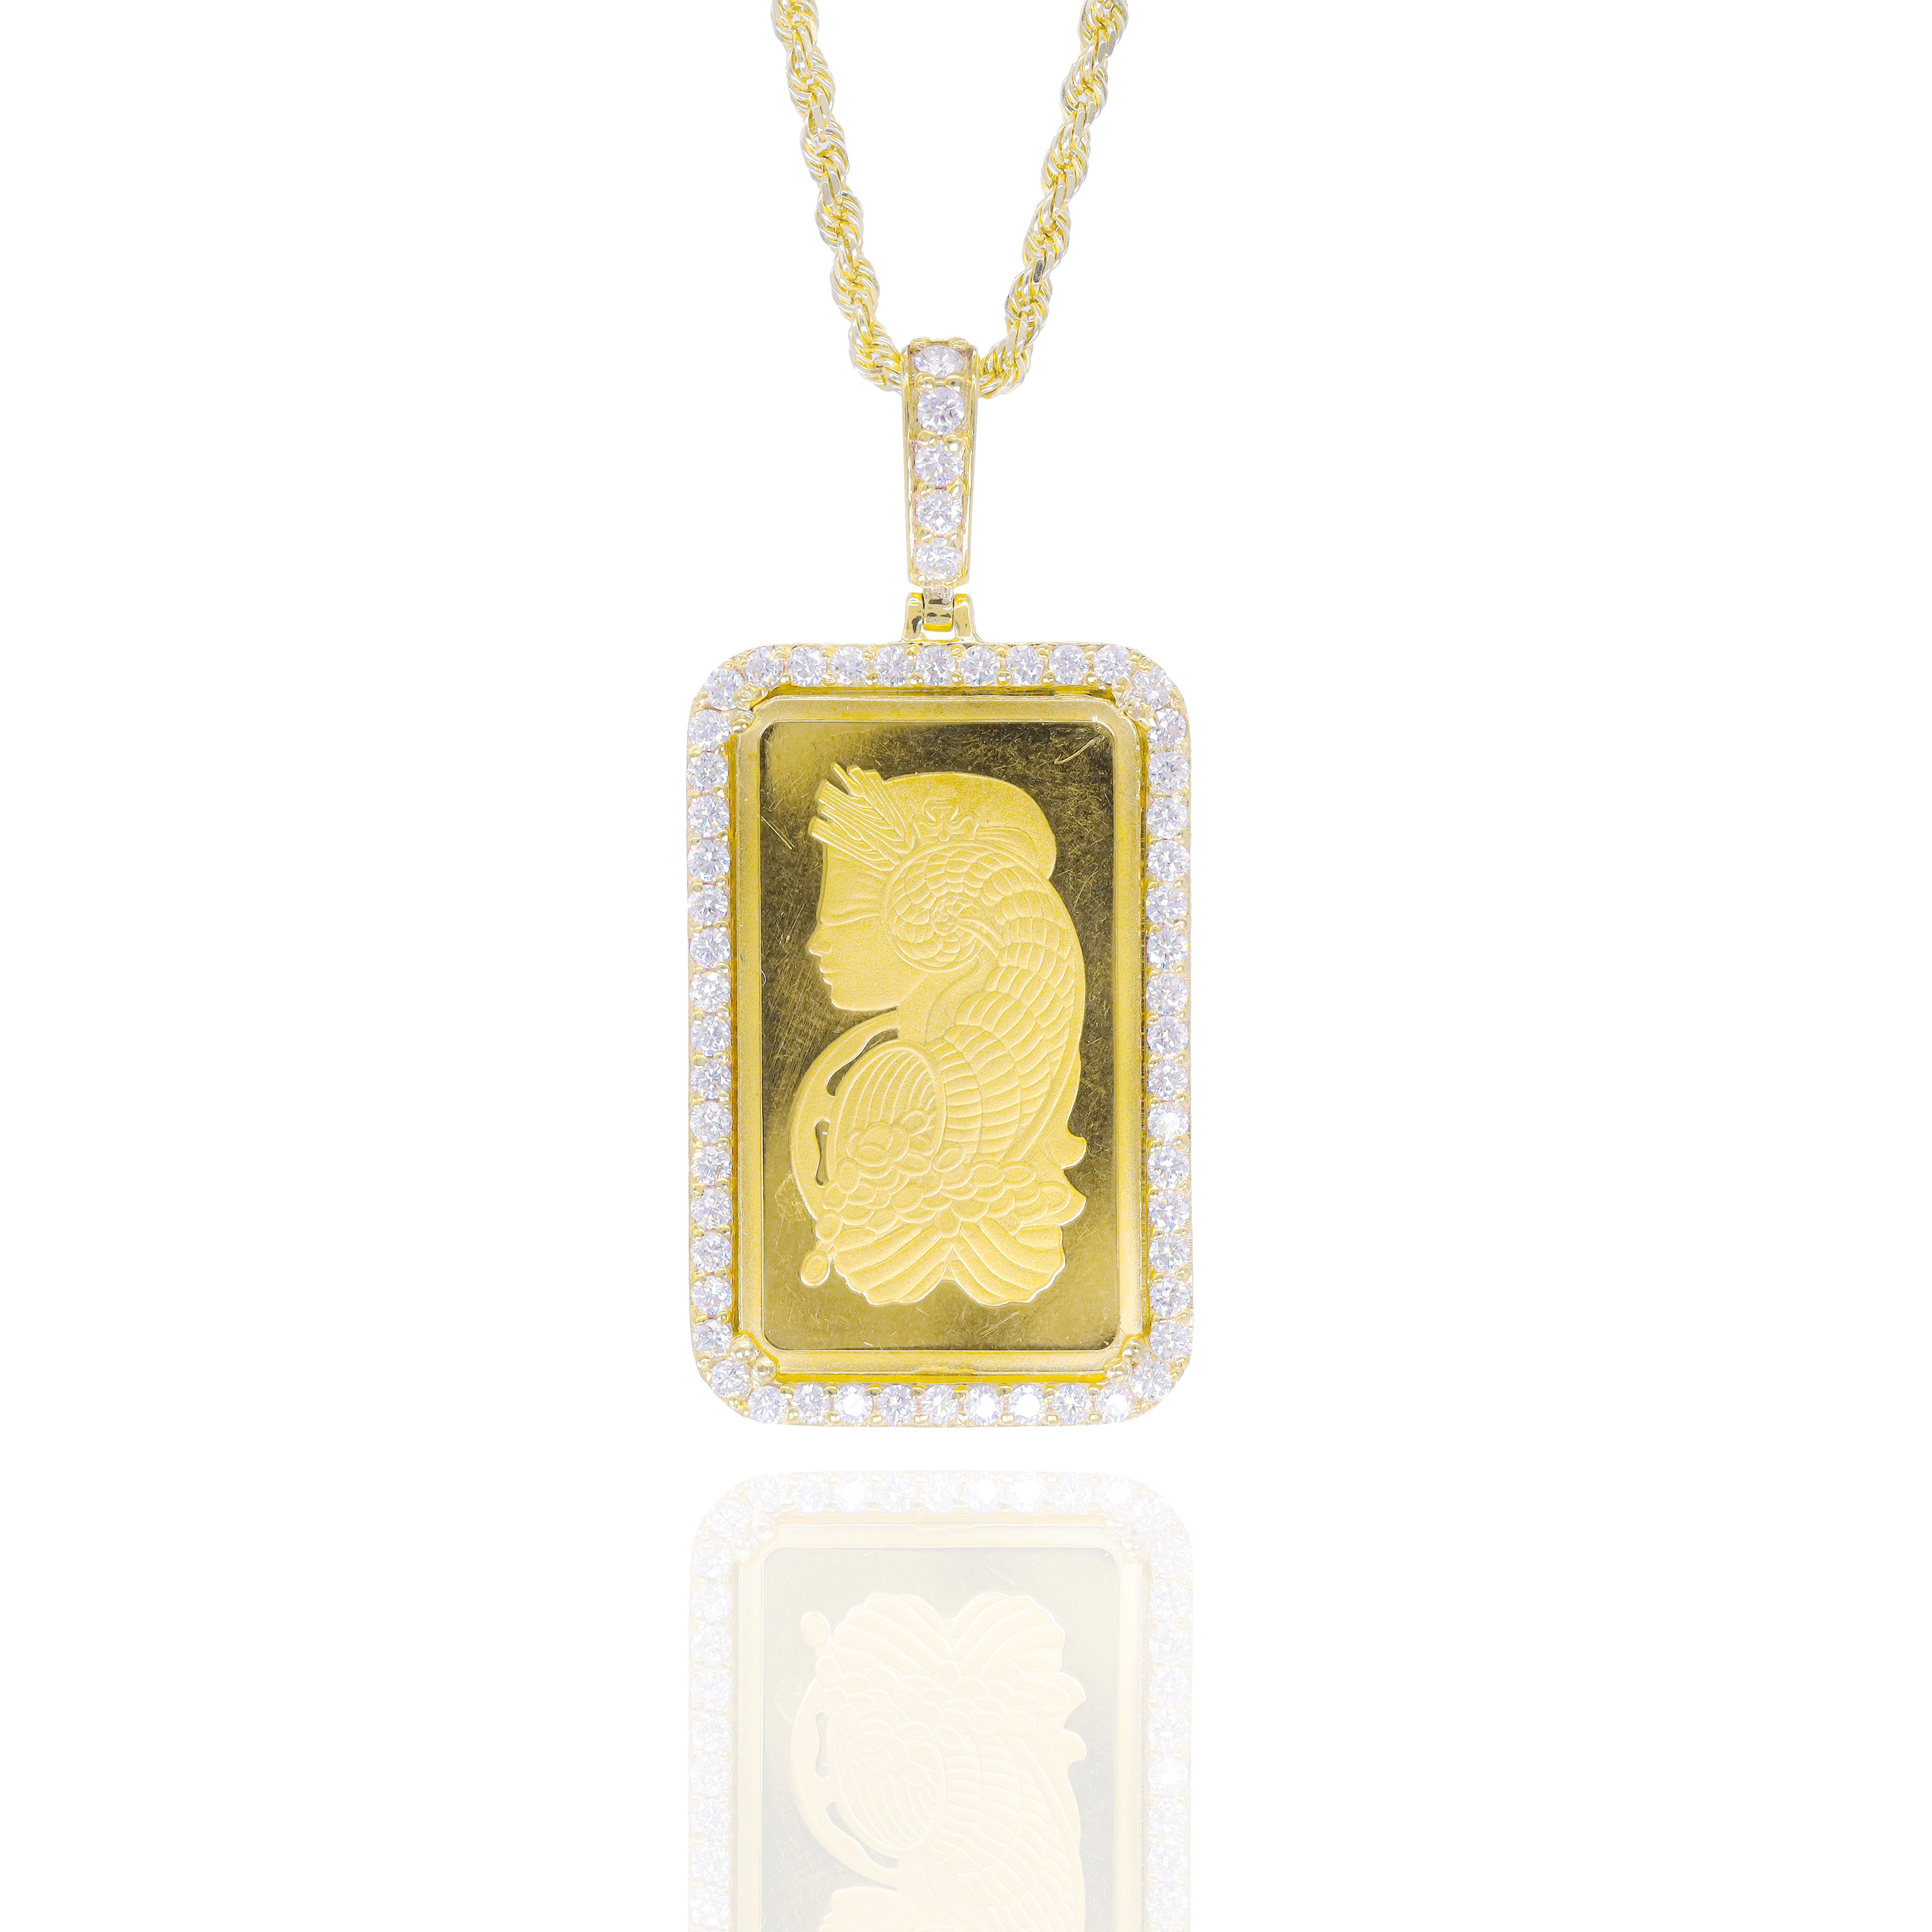 5g Gold Coin with Diamond Bezel Gold Pendant